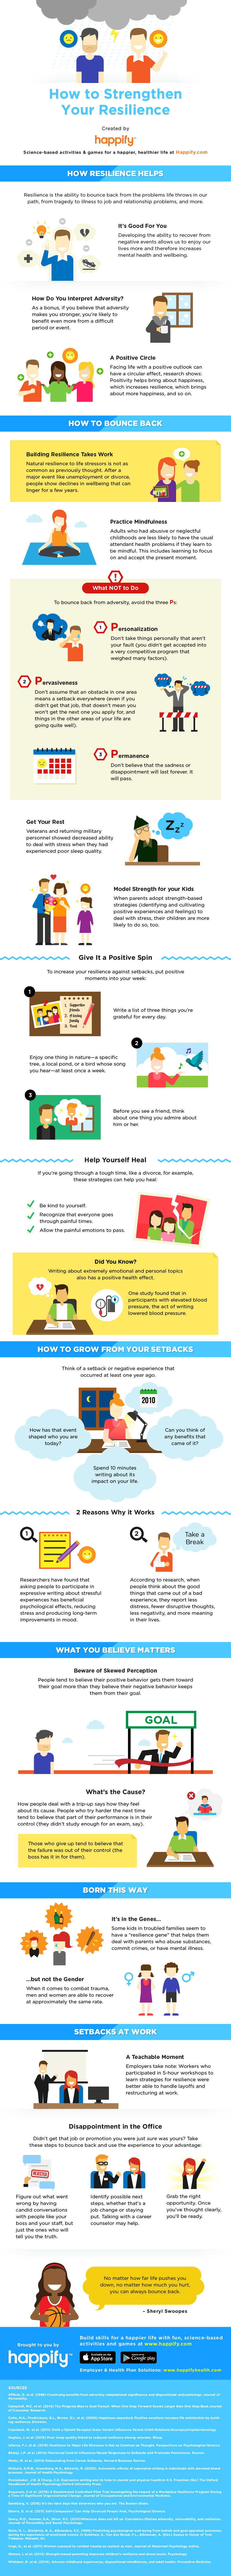 Infographic: How to Become More Resilient